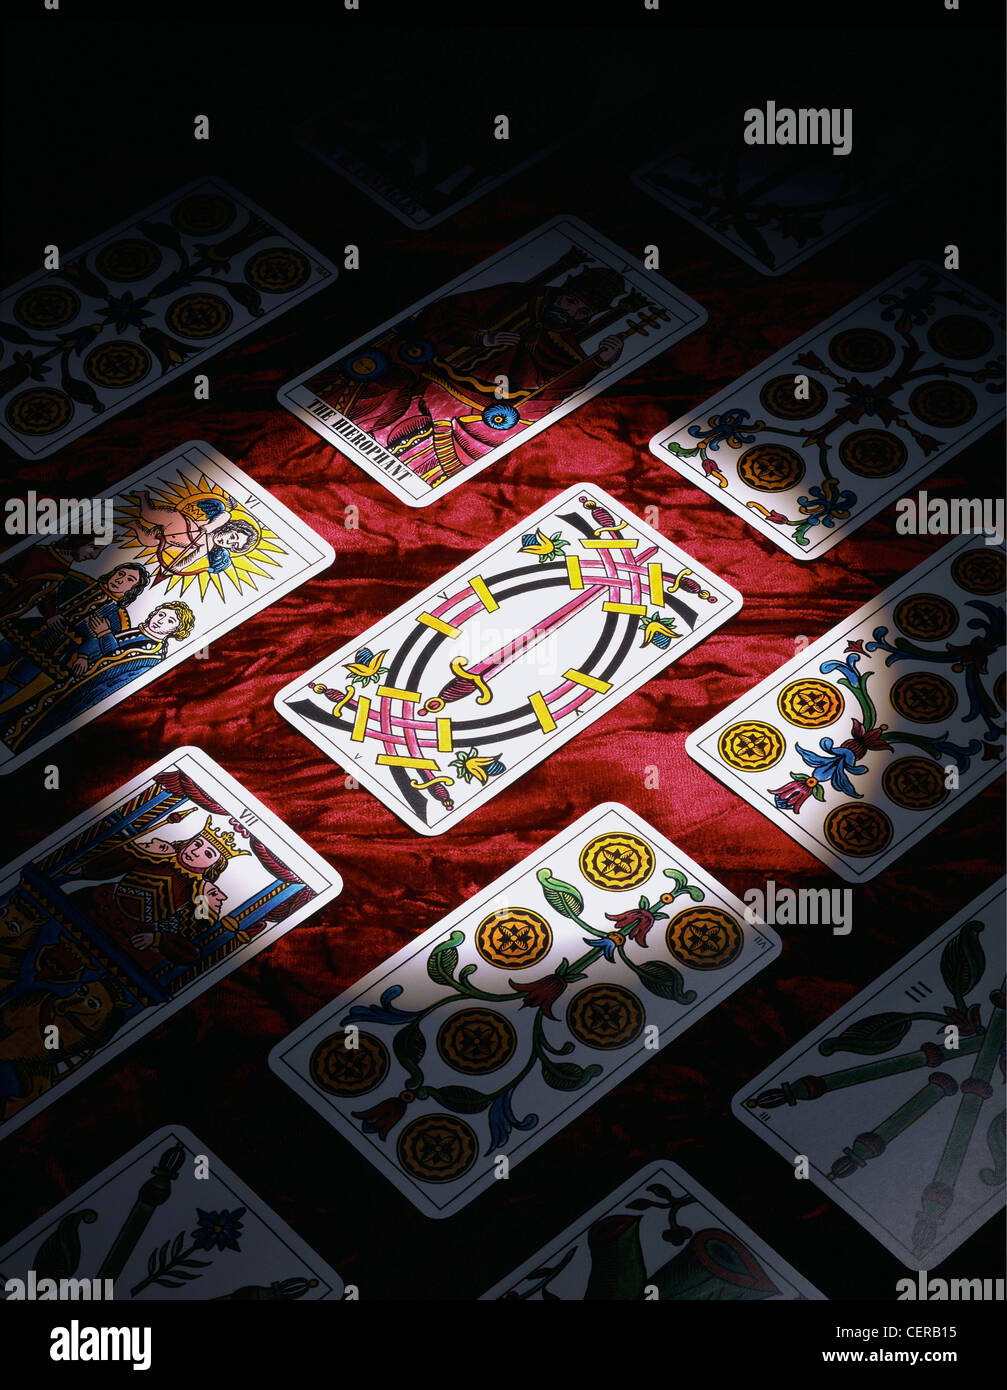 Tarot Cards laid out in rows on a red patterned background, partially lit by a spotlight Stock Photo